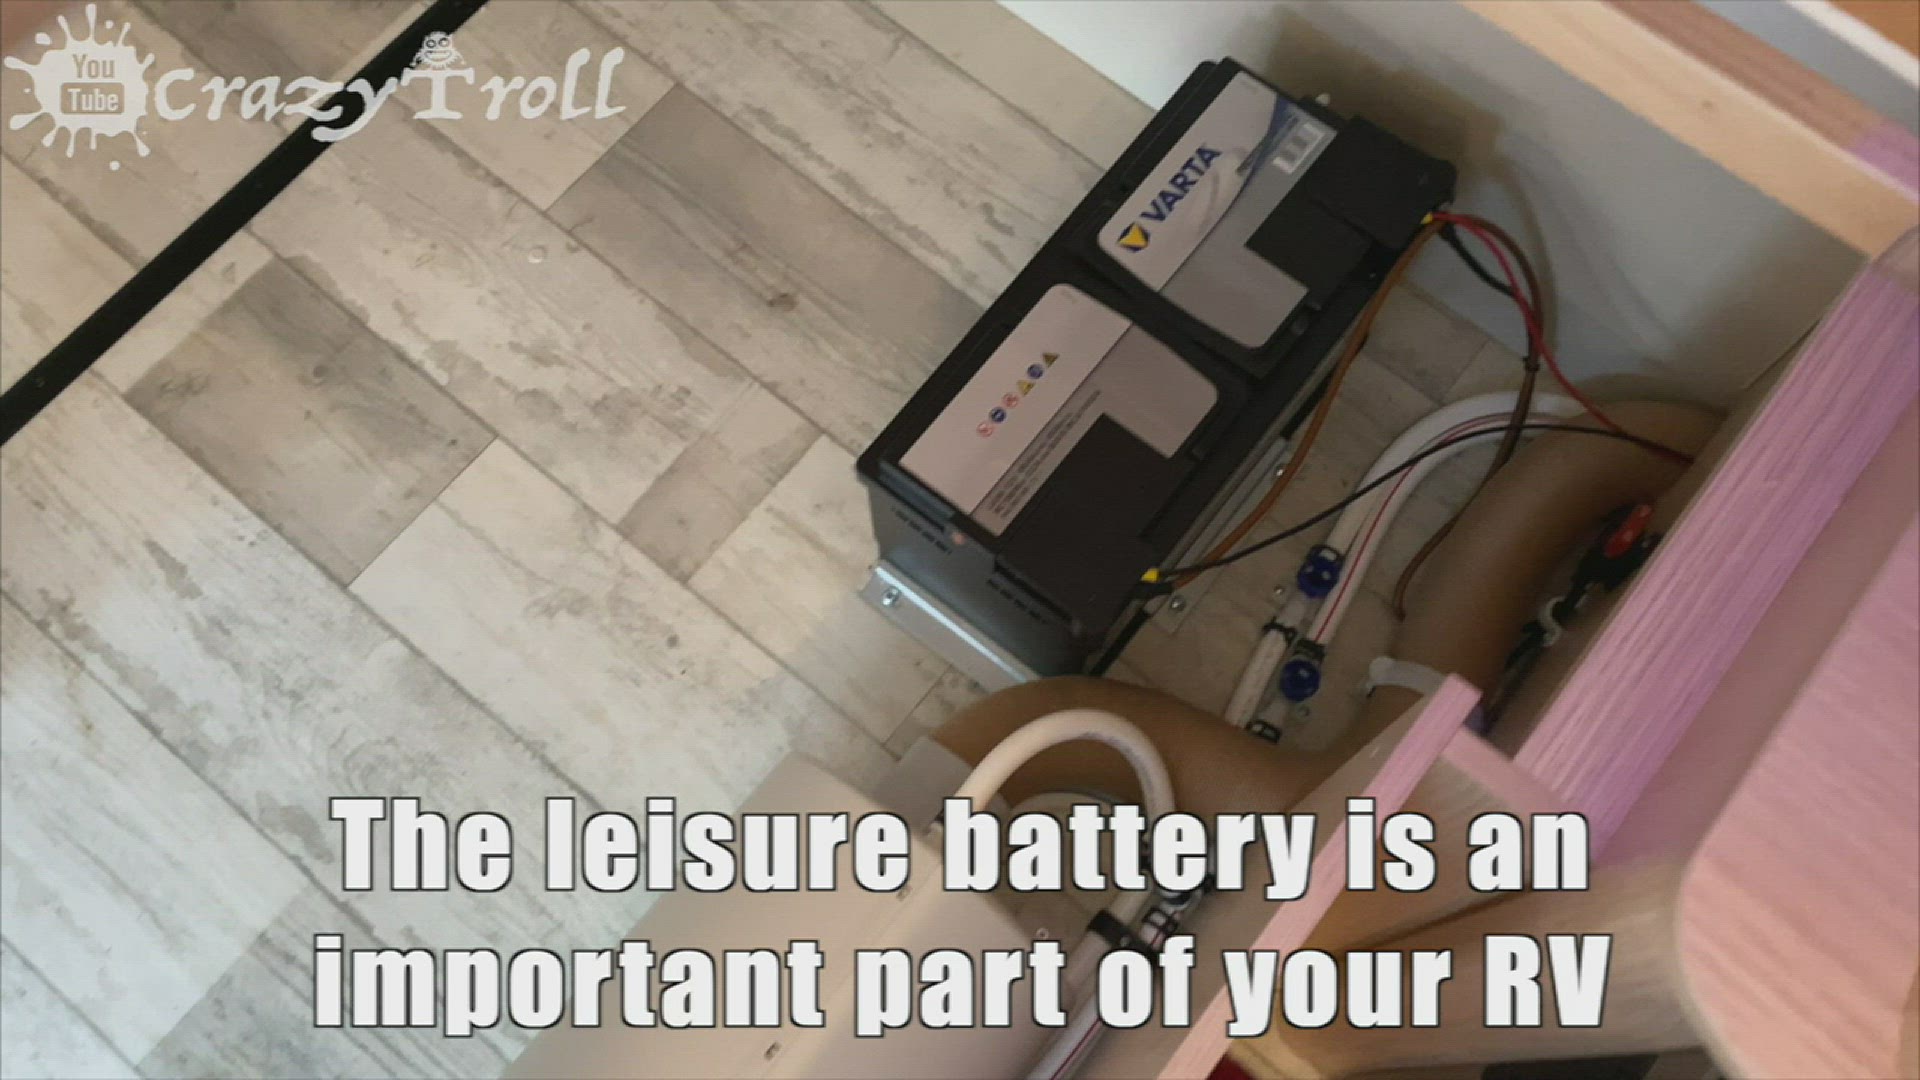 'Video thumbnail for RV leisure battery and power supply'